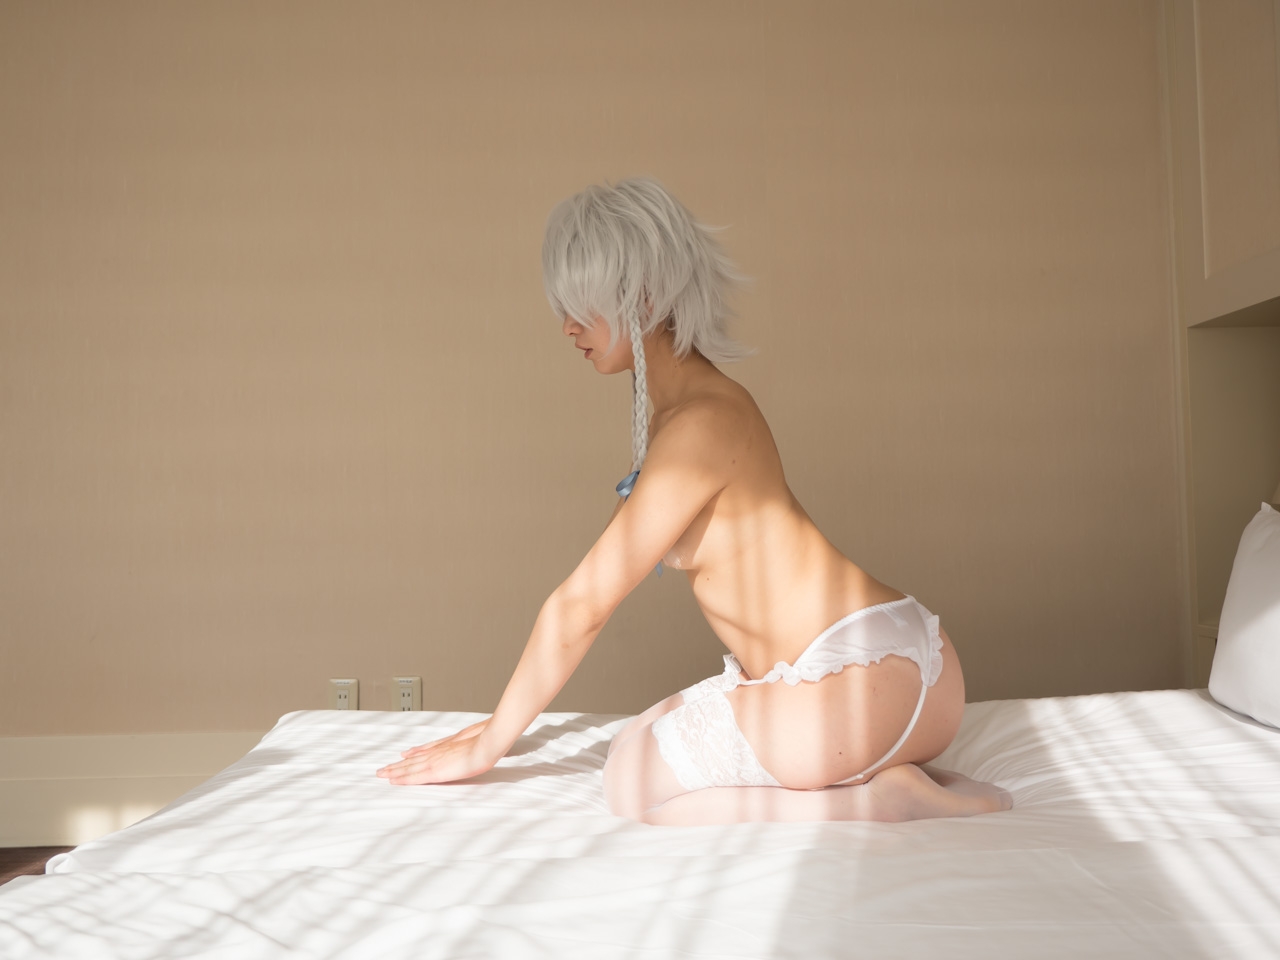 [Sakaki Cosplay Mistress] Sakaki Cosplay Mistress DL 001 (Touhou Project) 119